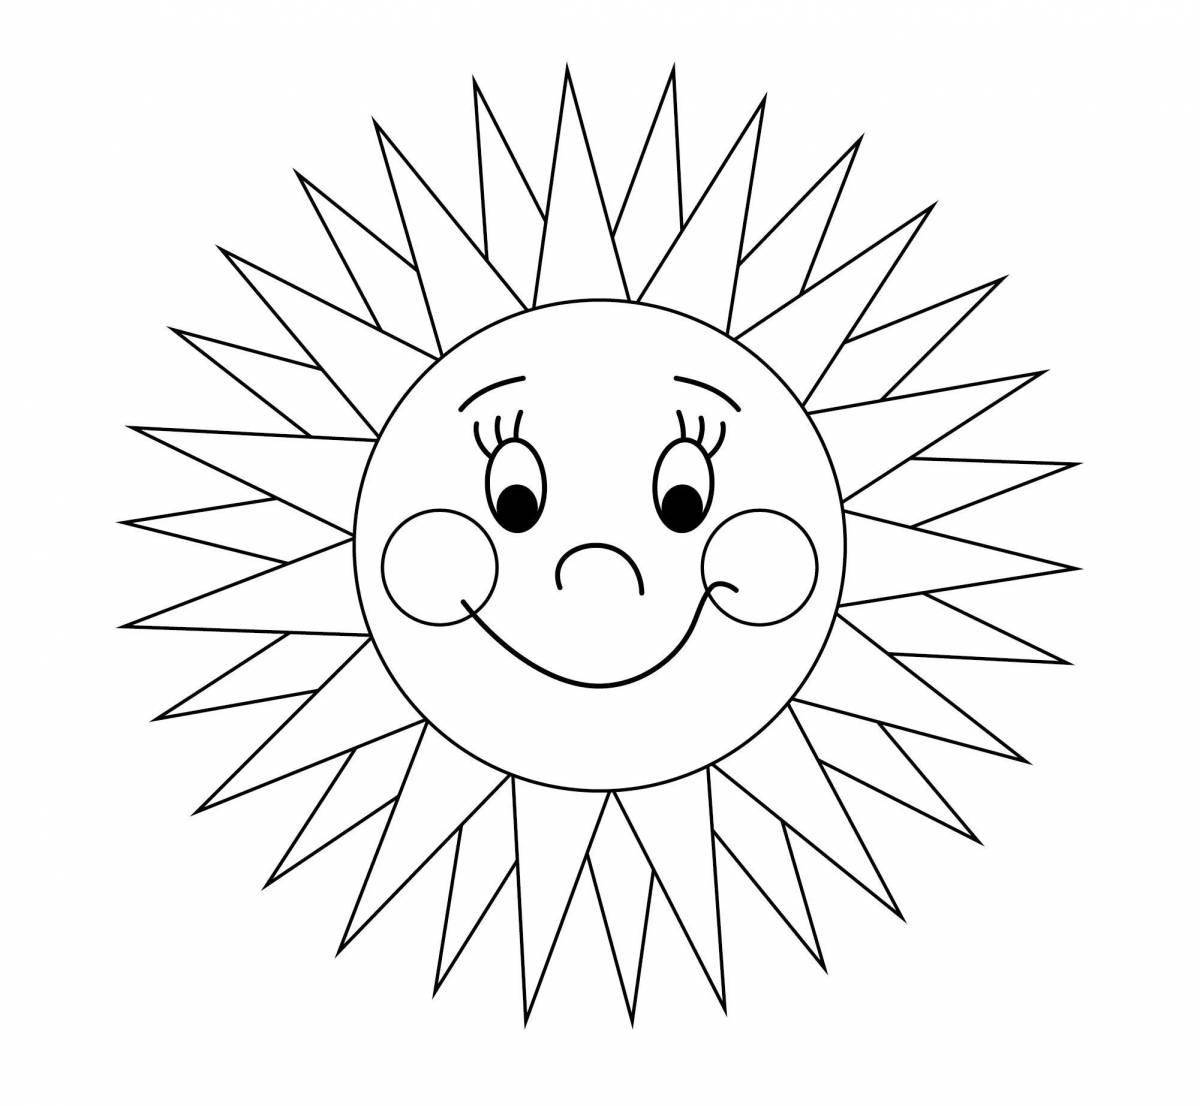 A fun coloring of the sun with rays